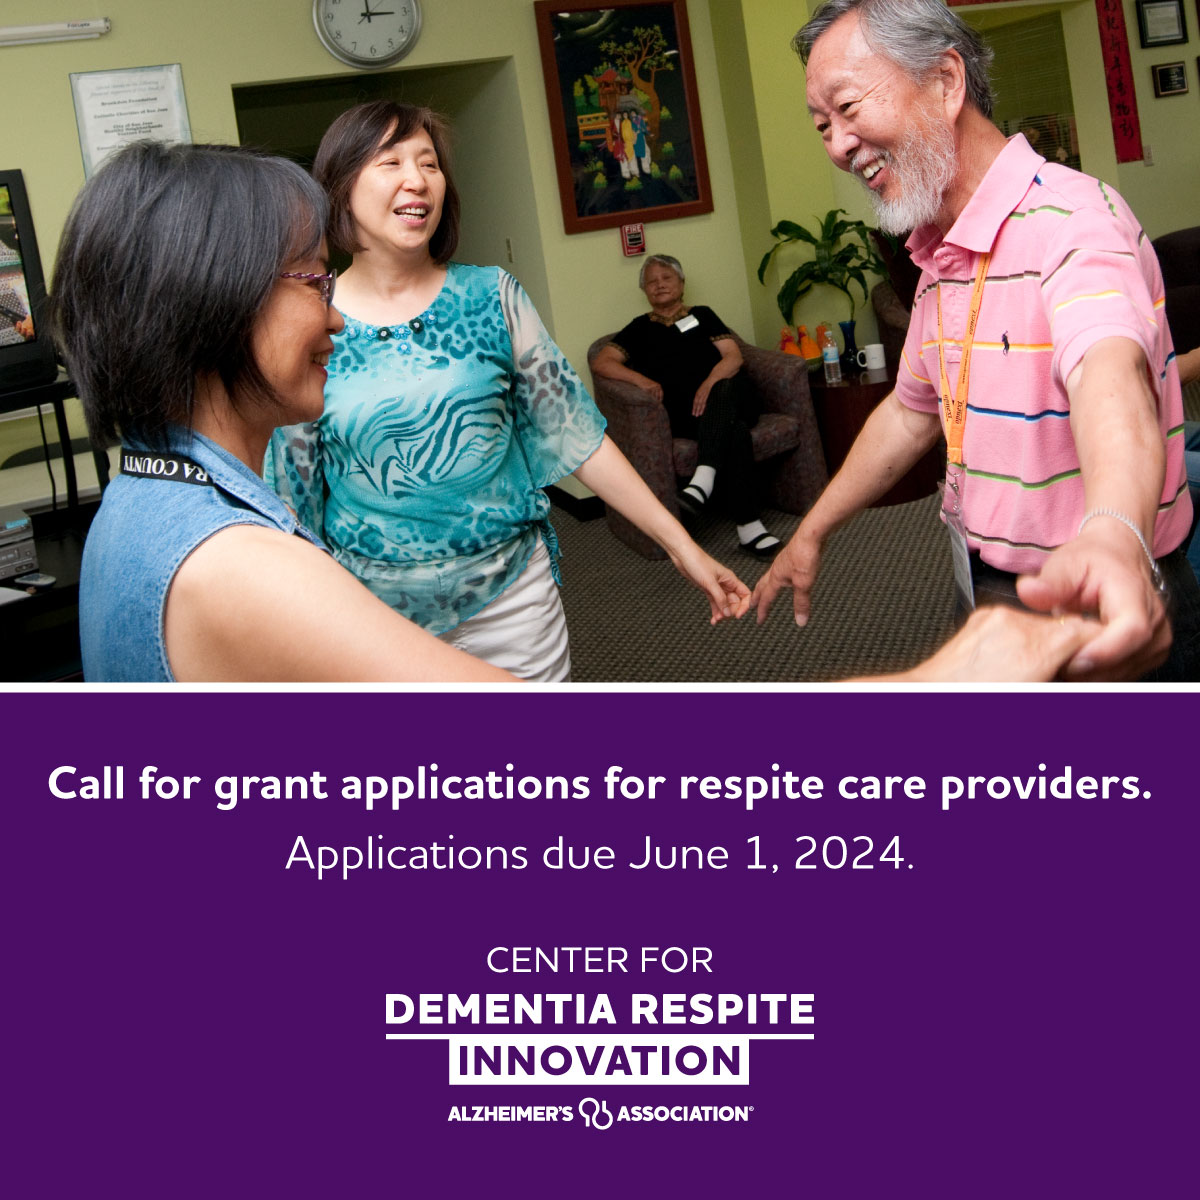 The @alzassociation Center for Dementia Respite Innovation is now accepting grant applications to enhance respite care for dementia caregivers. Respite providers (adult day centers, in-home services, innovative models) can learn more and should apply at alz.org/CDRI.